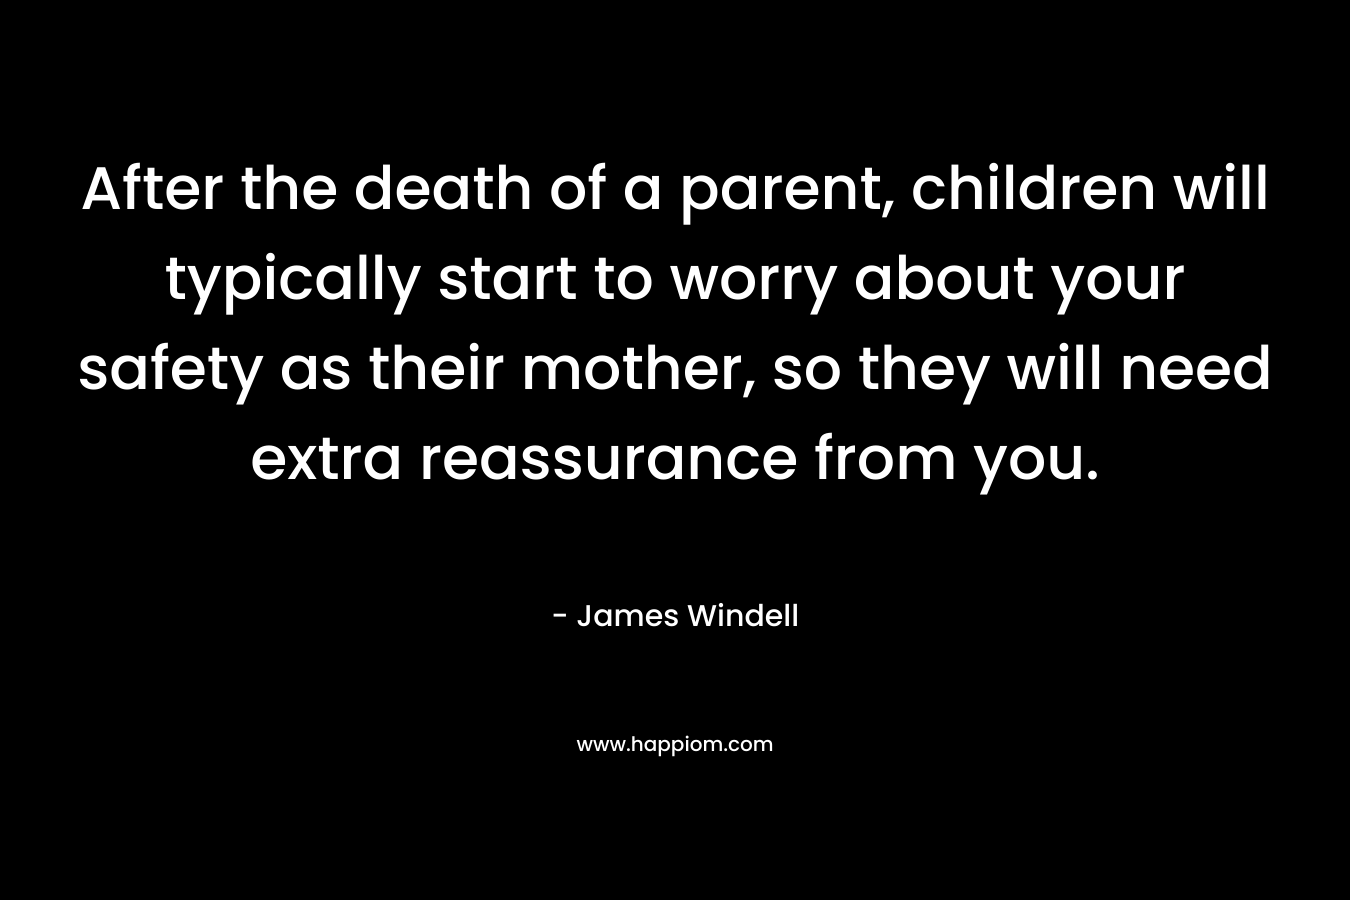 After the death of a parent, children will typically start to worry about your safety as their mother, so they will need extra reassurance from you. – James Windell